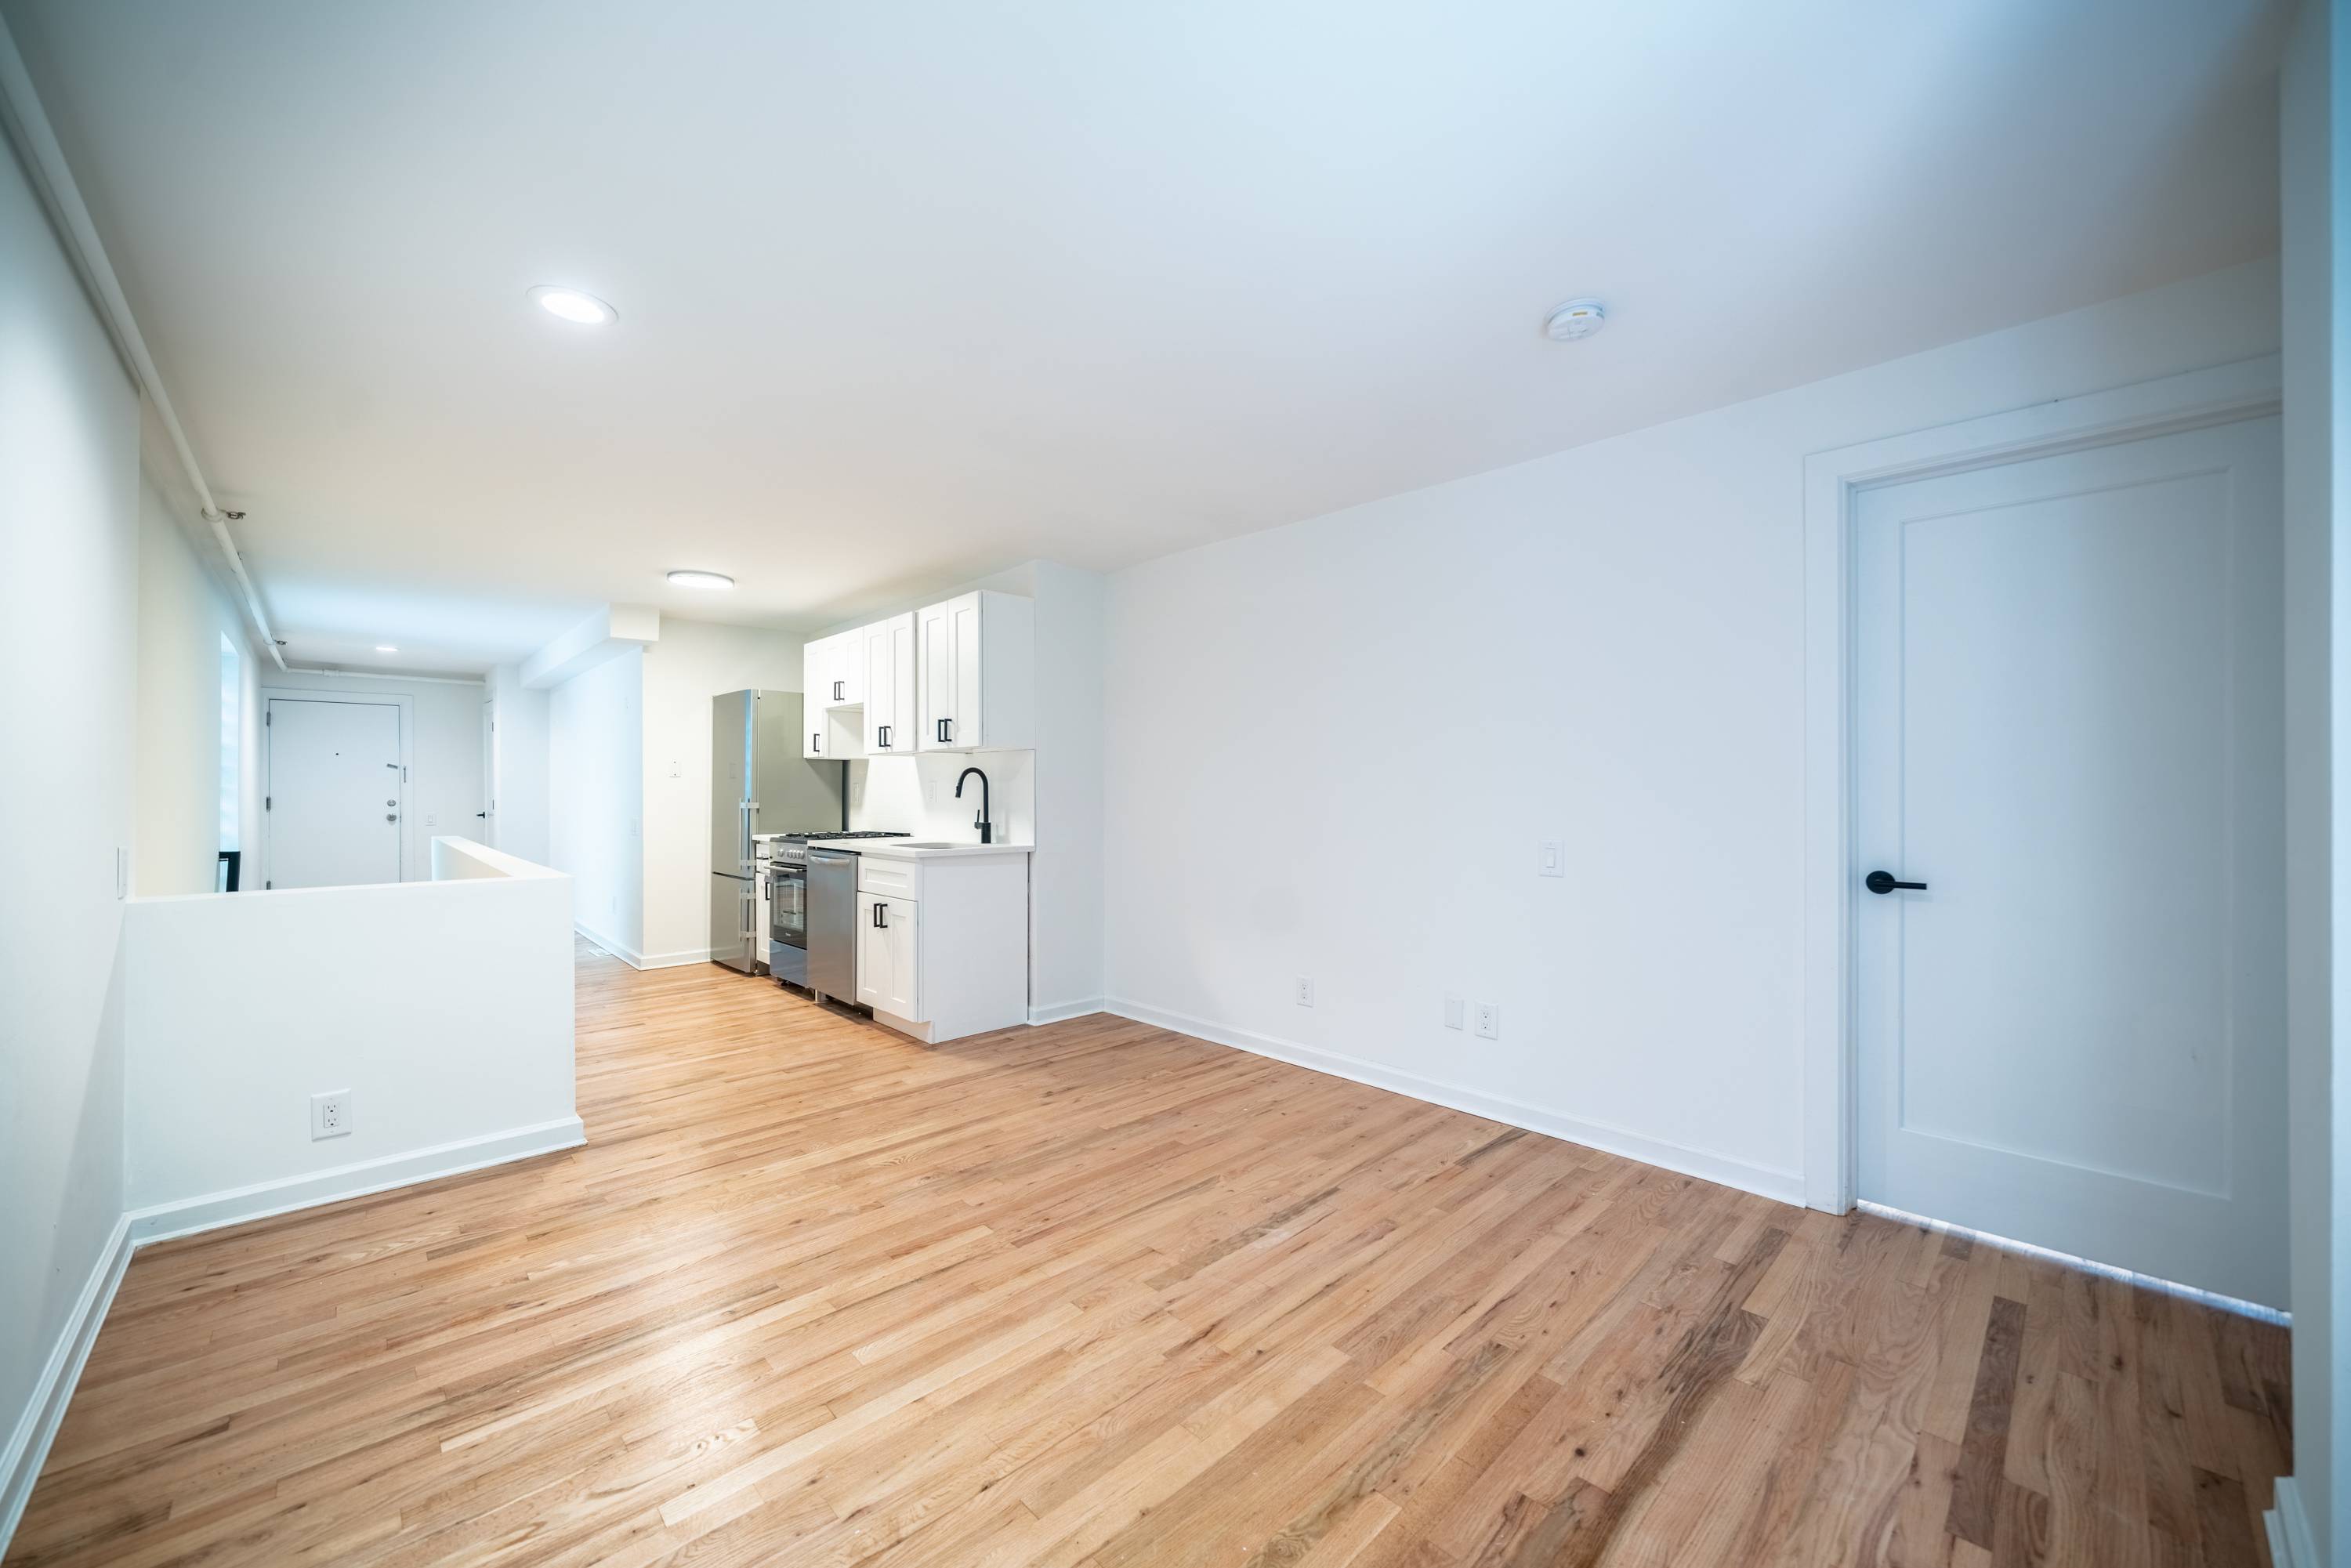 Beautiful Open Fully Renovated 2BR/2BA Apartment at 830 Hudson Street with Private Backyard!